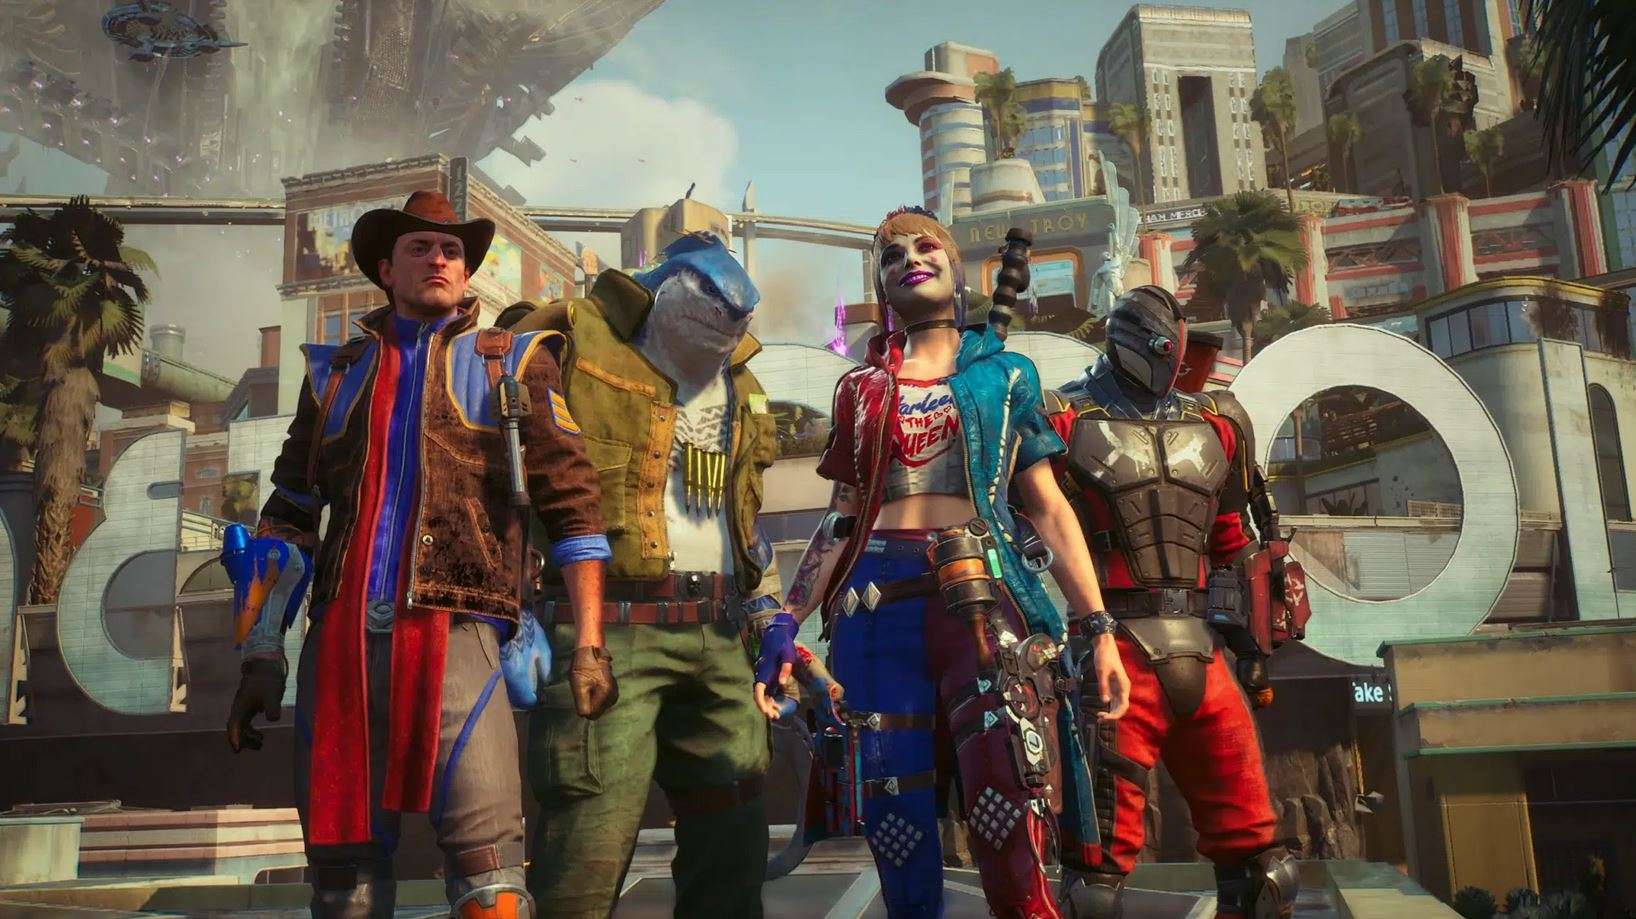 Games Enquirer on X: New Gameplay Trailer released today for Suicide Squad:  Kill the Justice League ahead of launch early next month (Link in Comments)  @wbgames @RocksteadyGames @DCOfficial @SuicideSquadWB #SuicideSquad #gaming  #games #